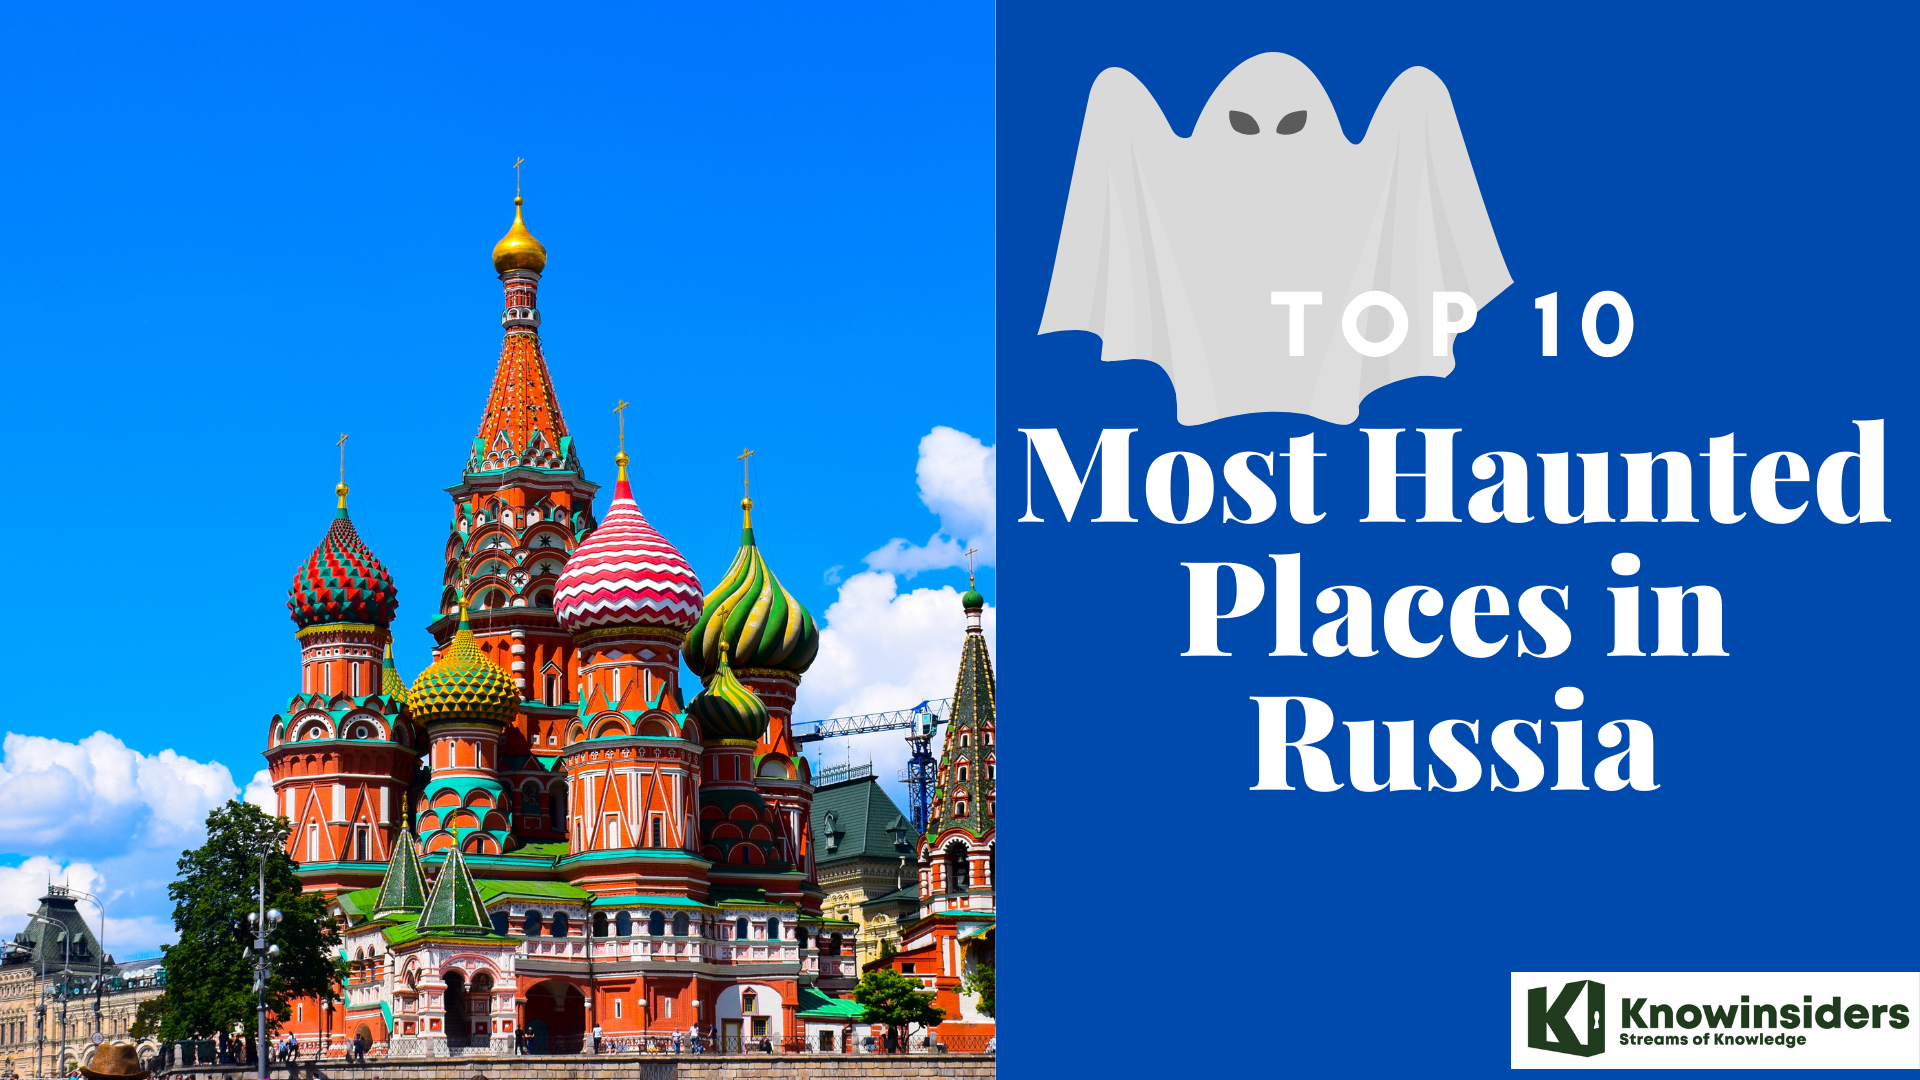 Top 10 Most Haunted Places in Russia